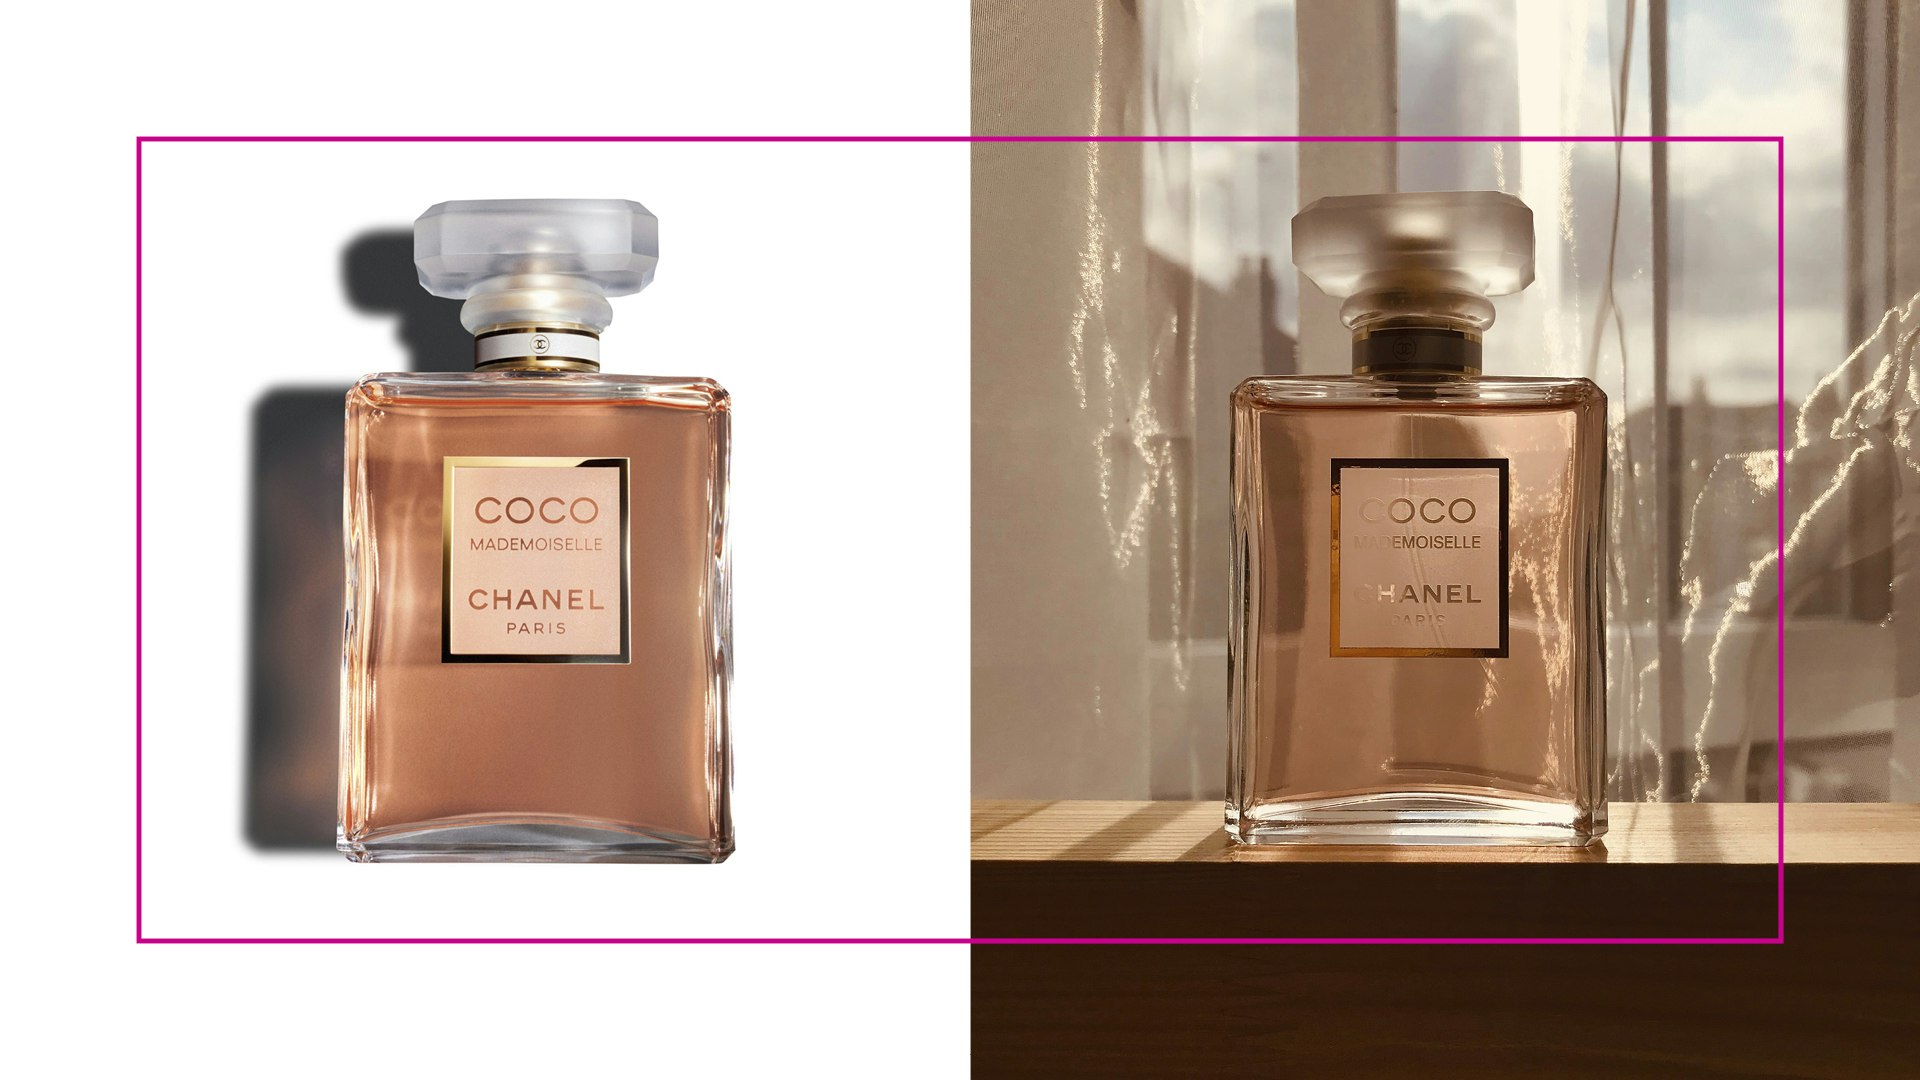 Chanel Coco Mademoiselle with Keira Knightley  Coco chanel mademoiselle,  Chanel fragrance, Coco mademoiselle